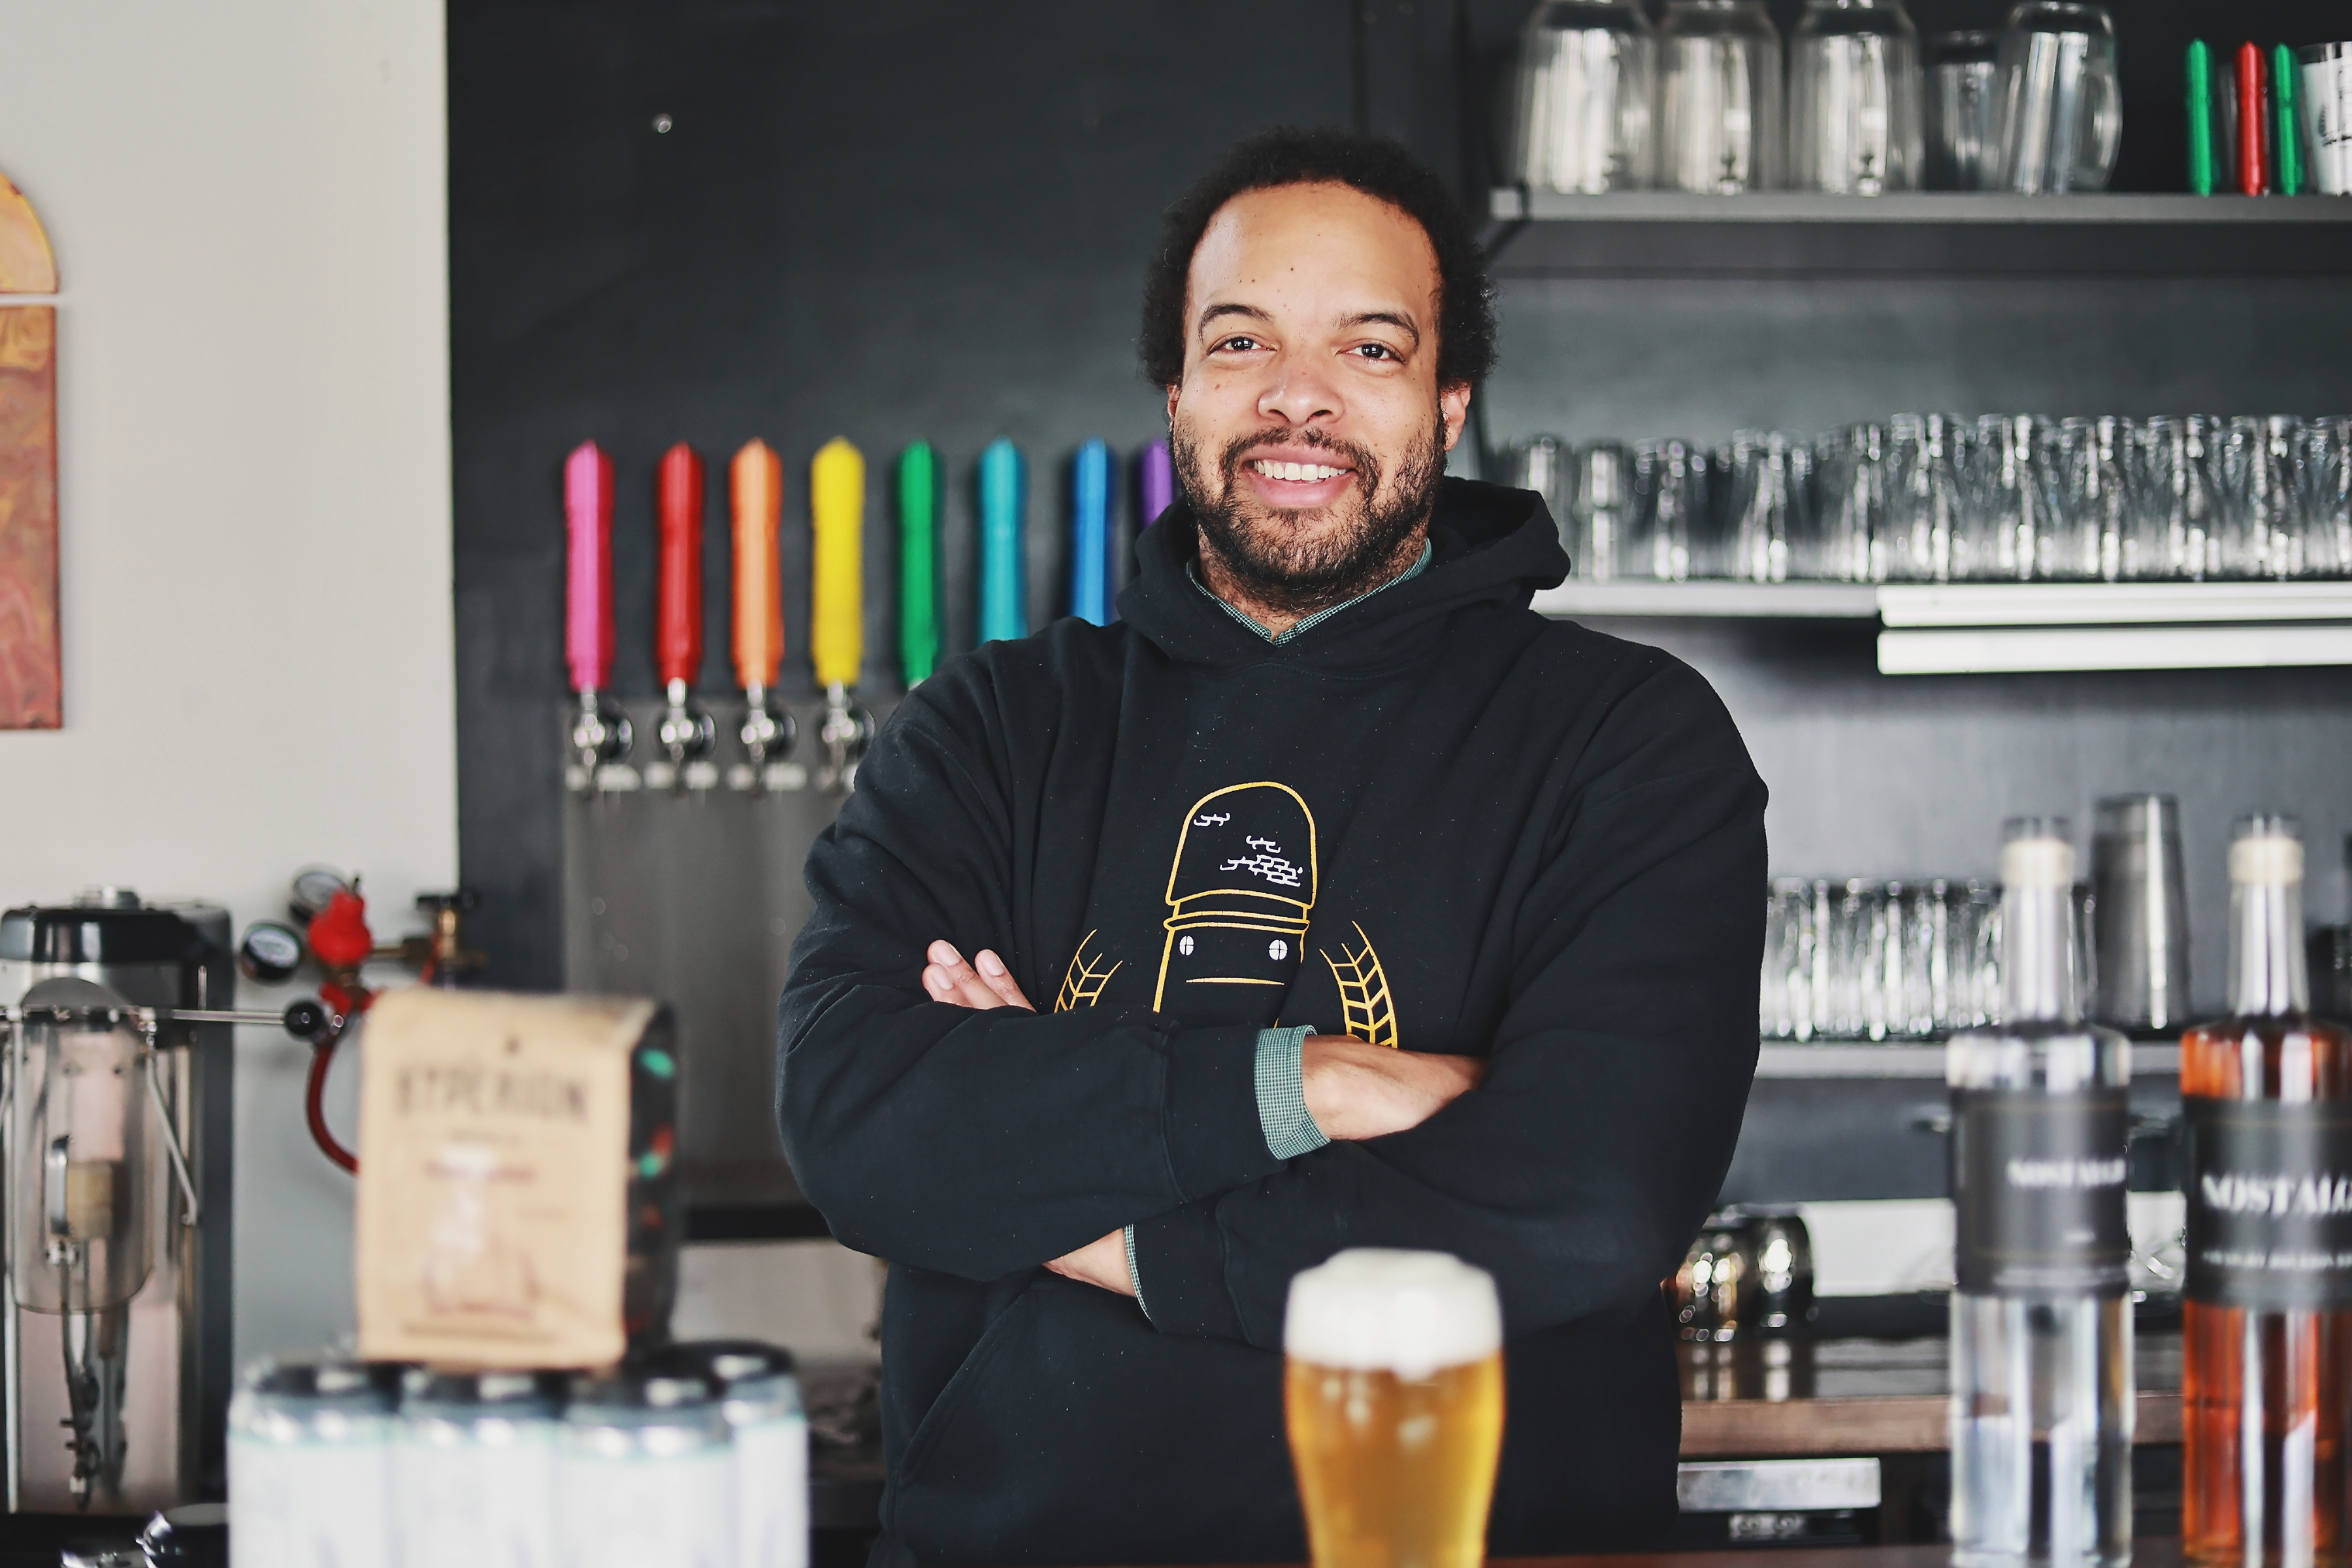 Brian Jones-Chance wears a black hooded sweatshirt with a cartoon of the Ypsilanti water tower on it and smiles behind the bar at 734 Brewing with colorful taps and a foamy, amber beer.